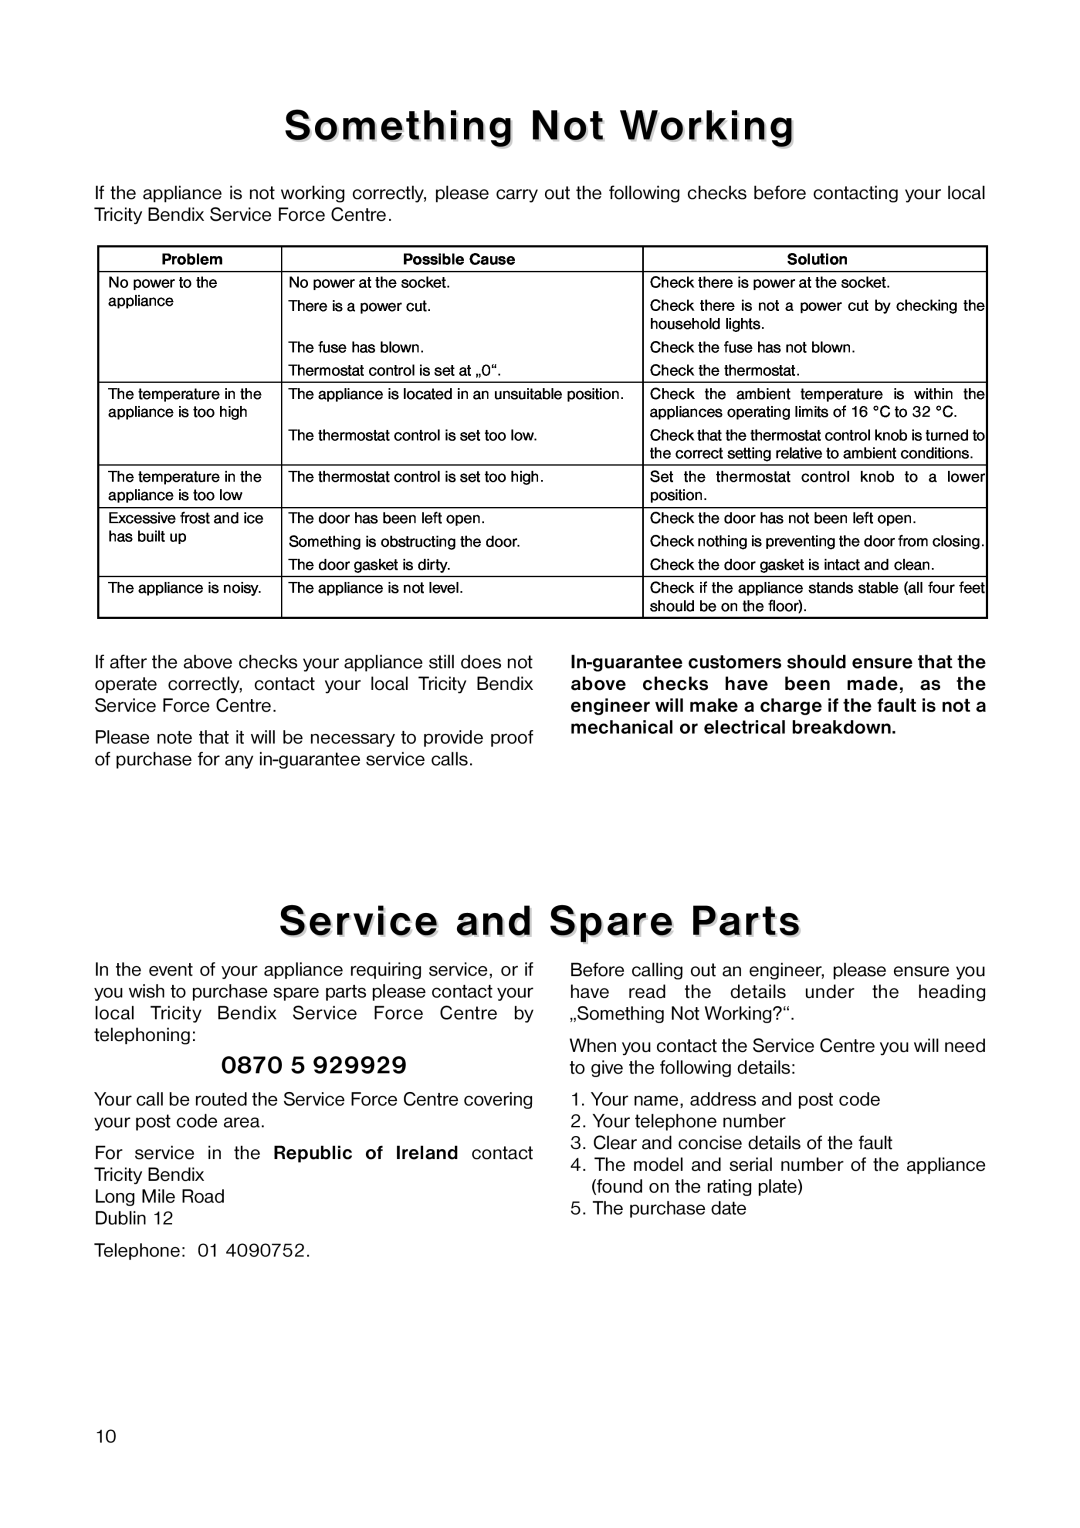 Tricity Bendix TB 58 R installation instructions Something Not Working, Service and Spare Parts, 0870 